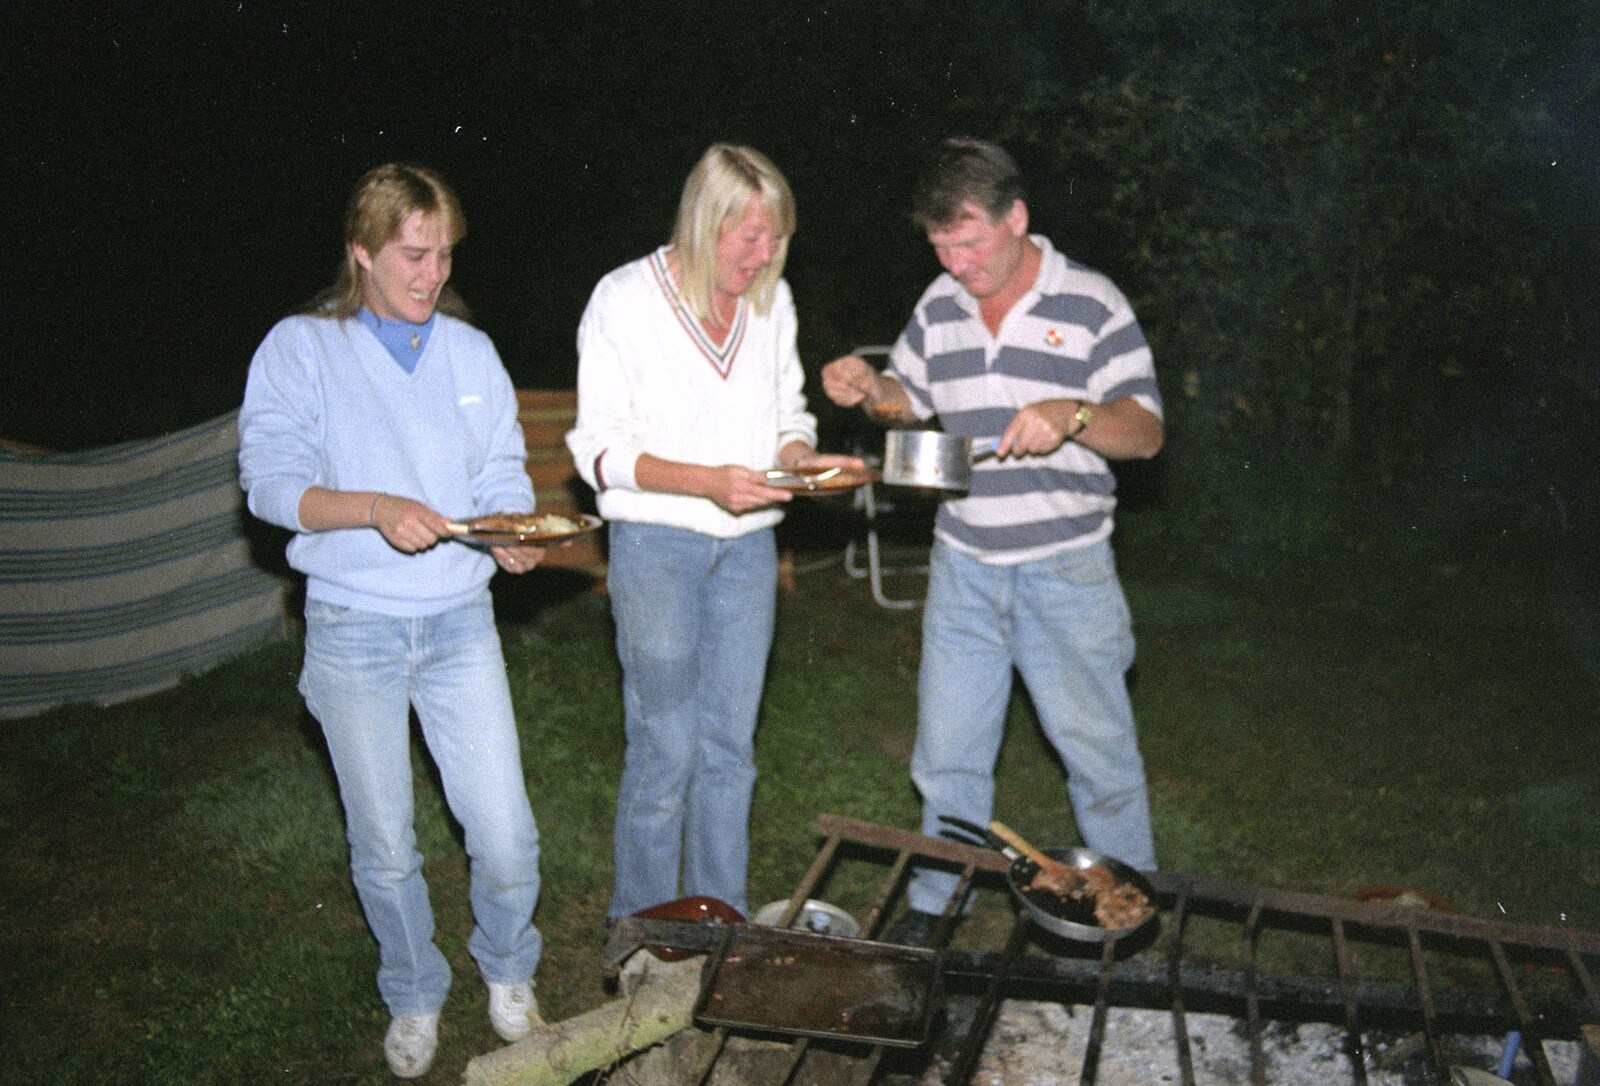 Sue's Fire Dance, Stuston, Suffolk - 21st July 1990: Bernie scoops beans out of a pan